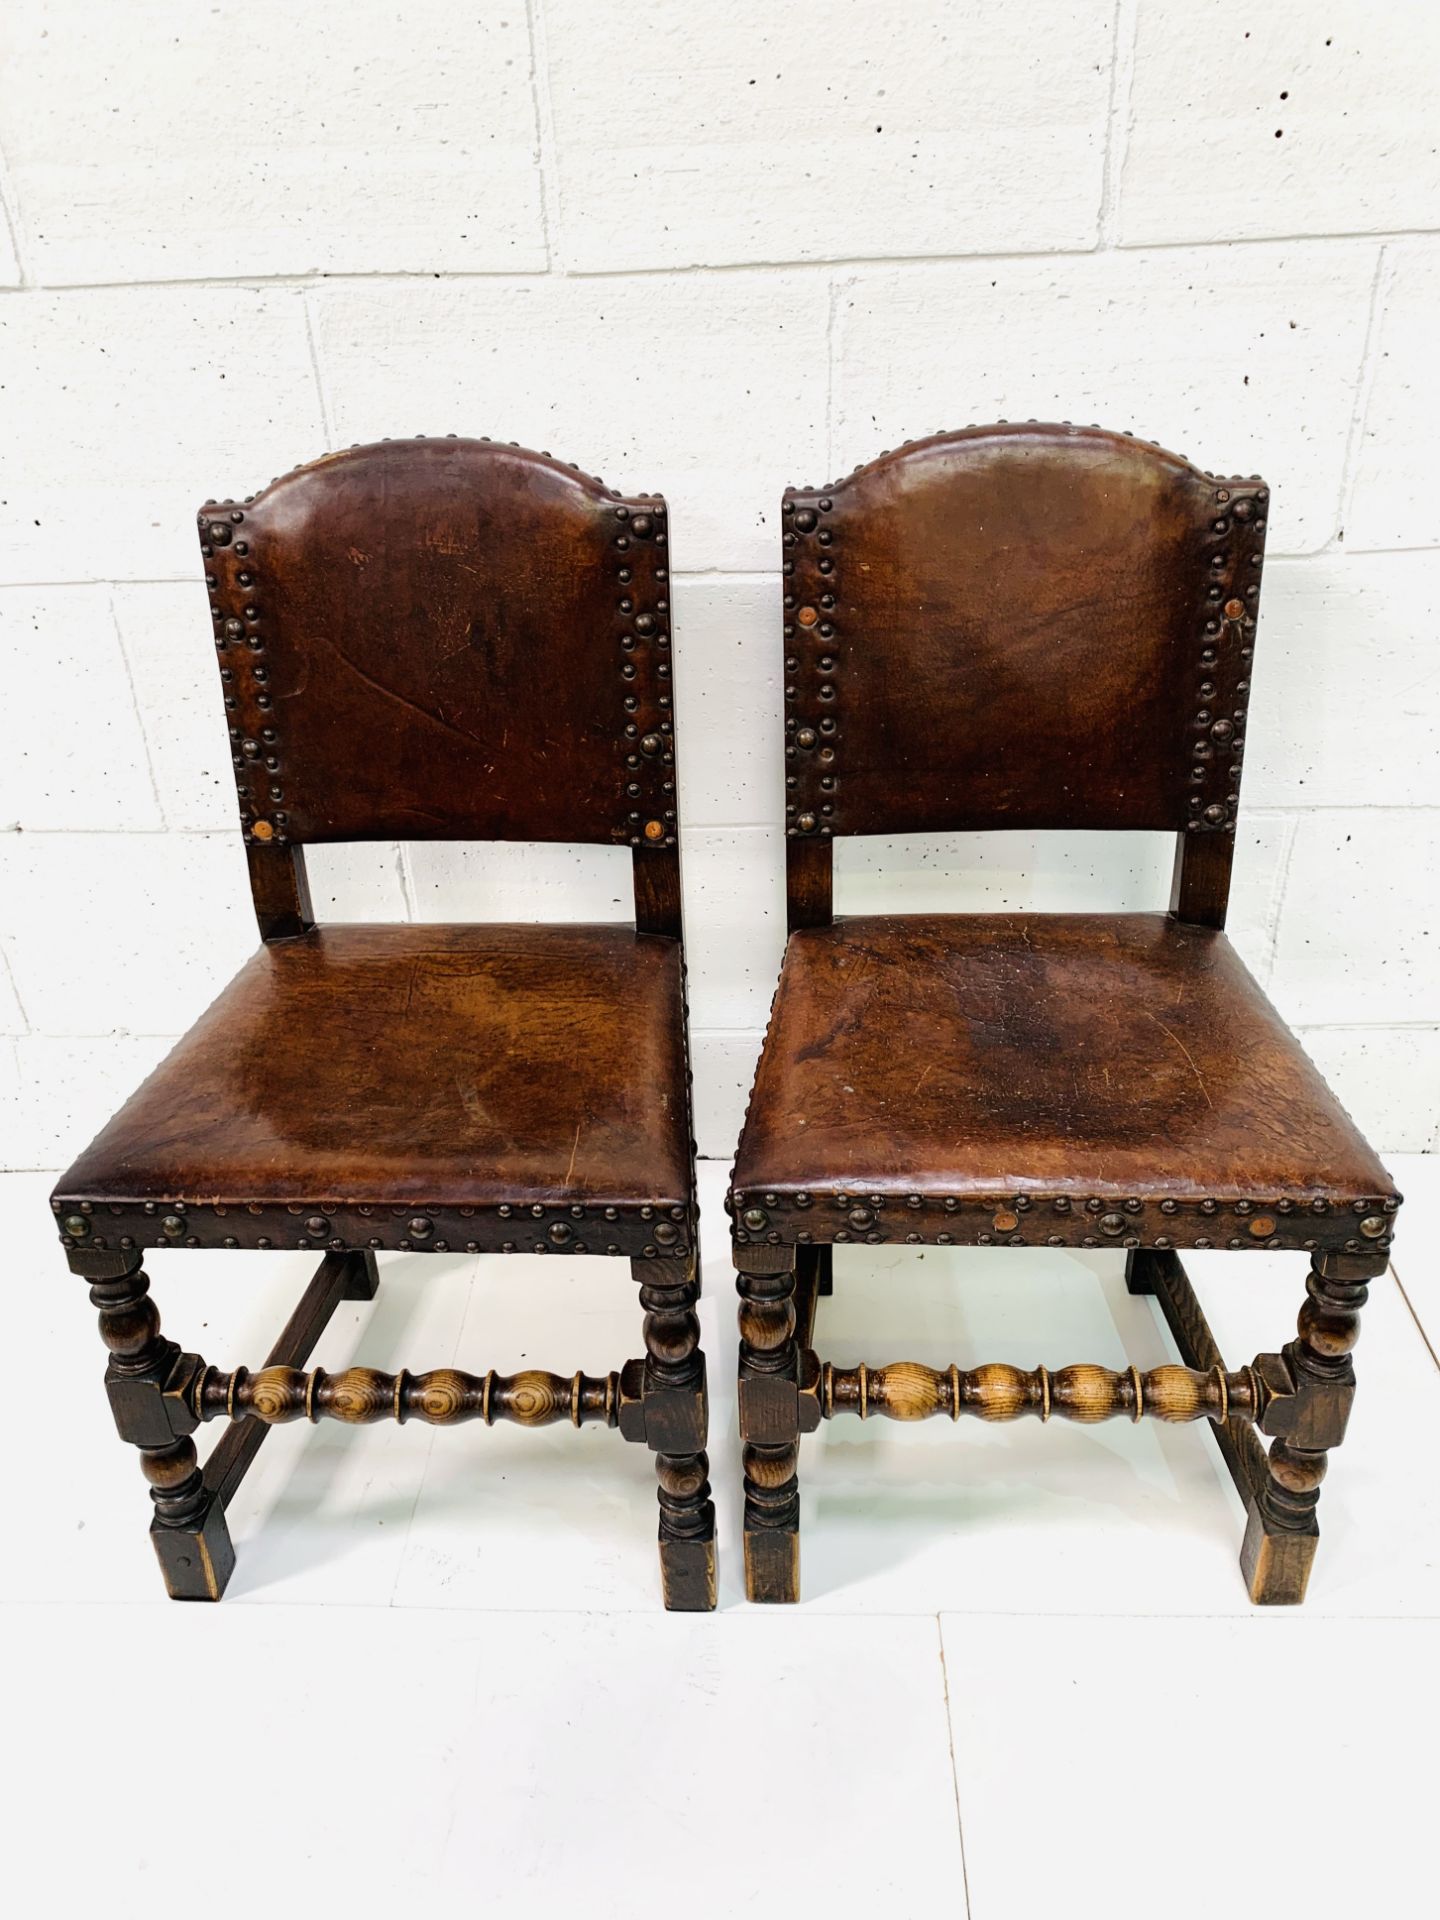 Two studded leather and oak hall chairs.